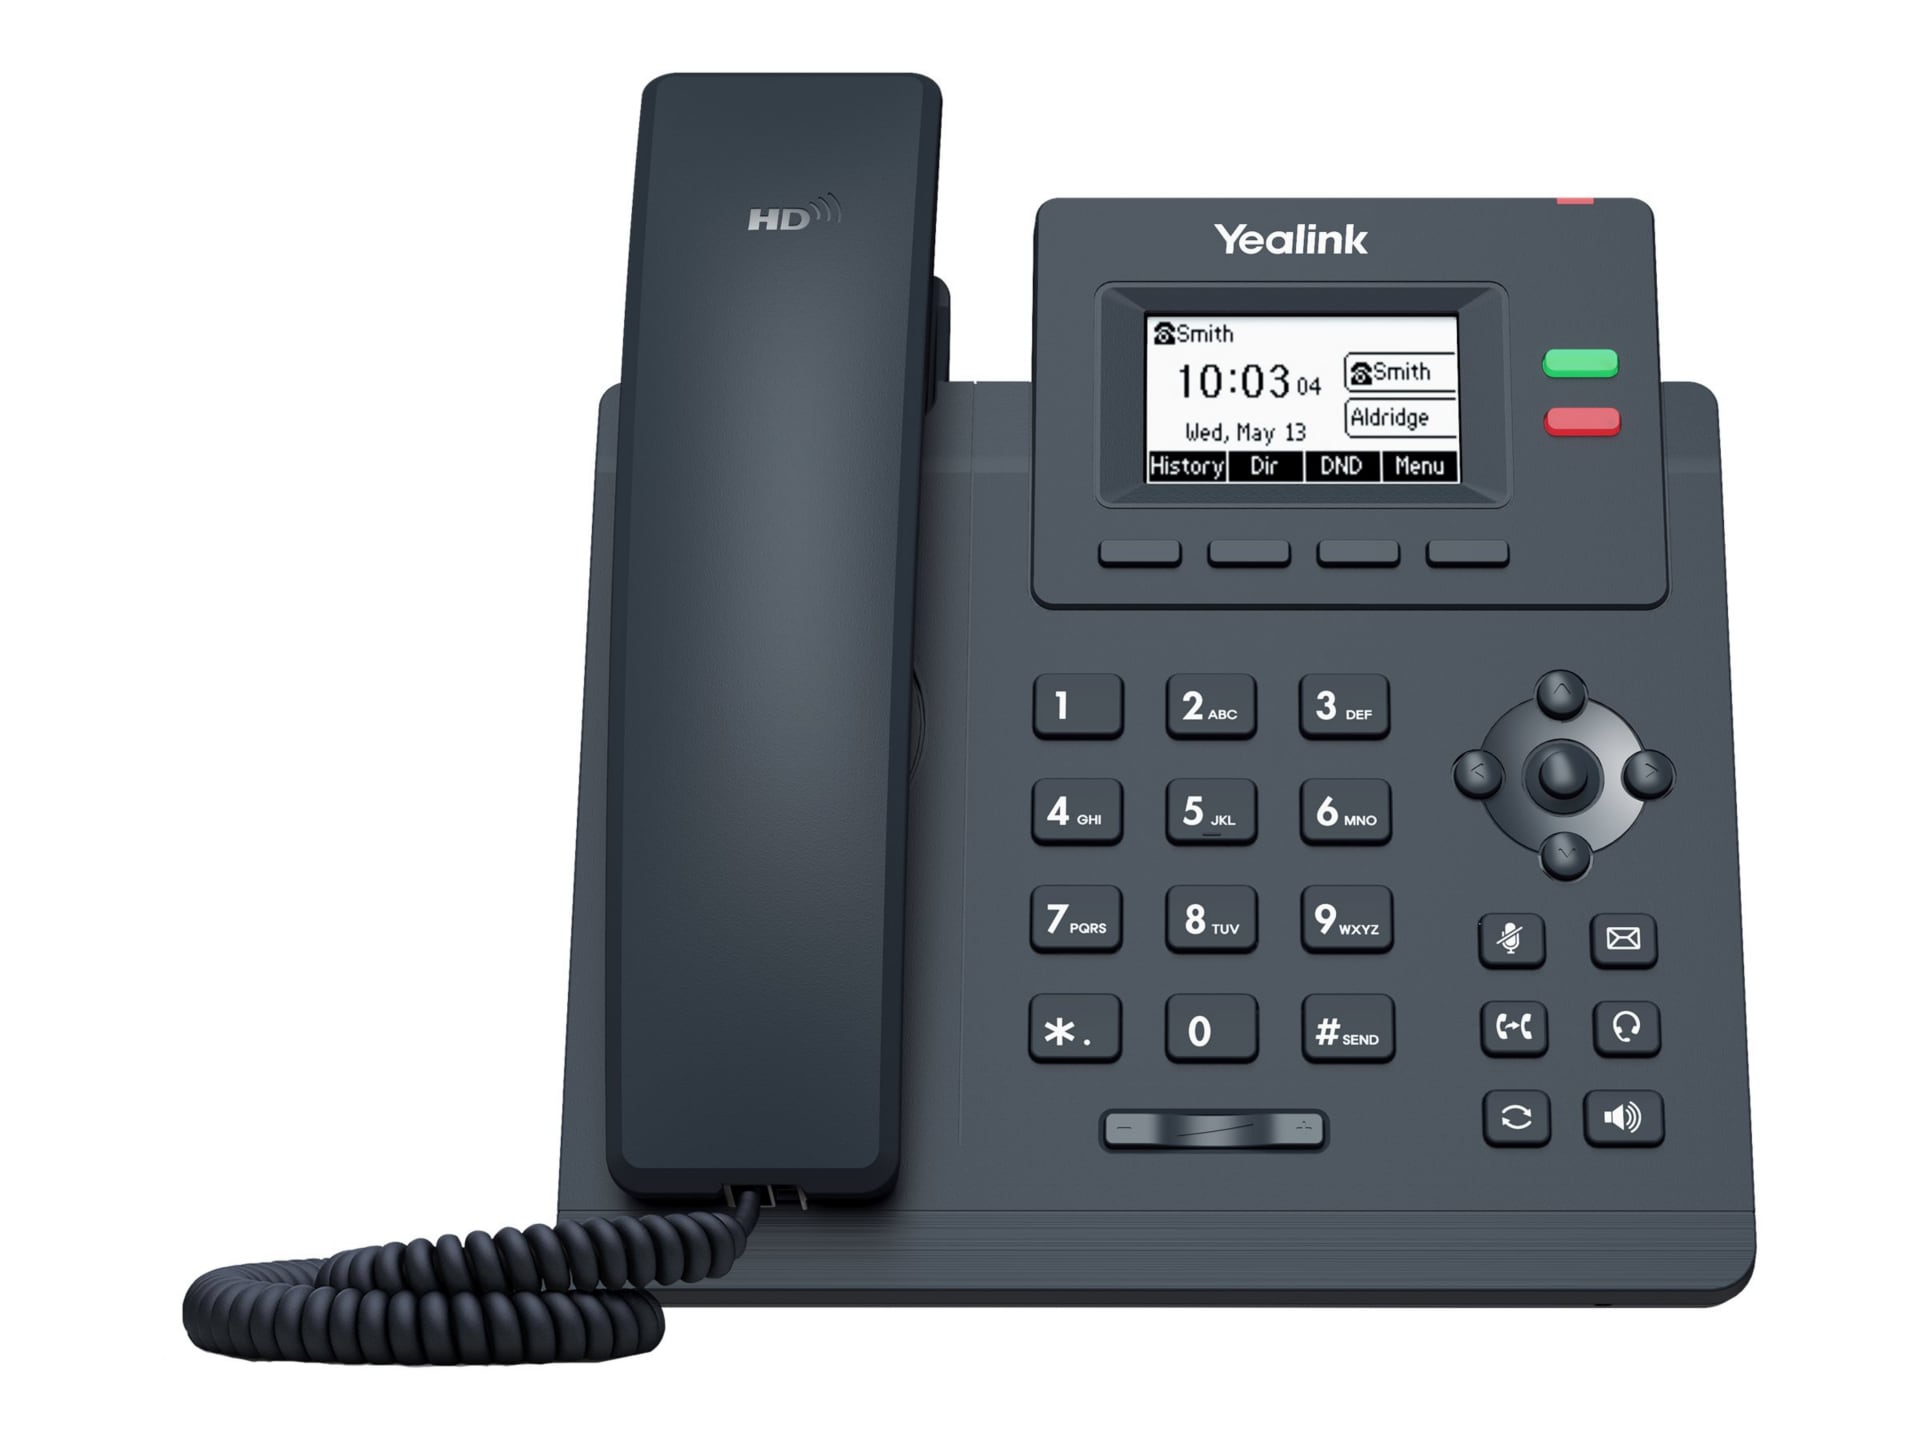 Yealink SIP-T31G - VoIP phone with caller ID - 5-way call capability